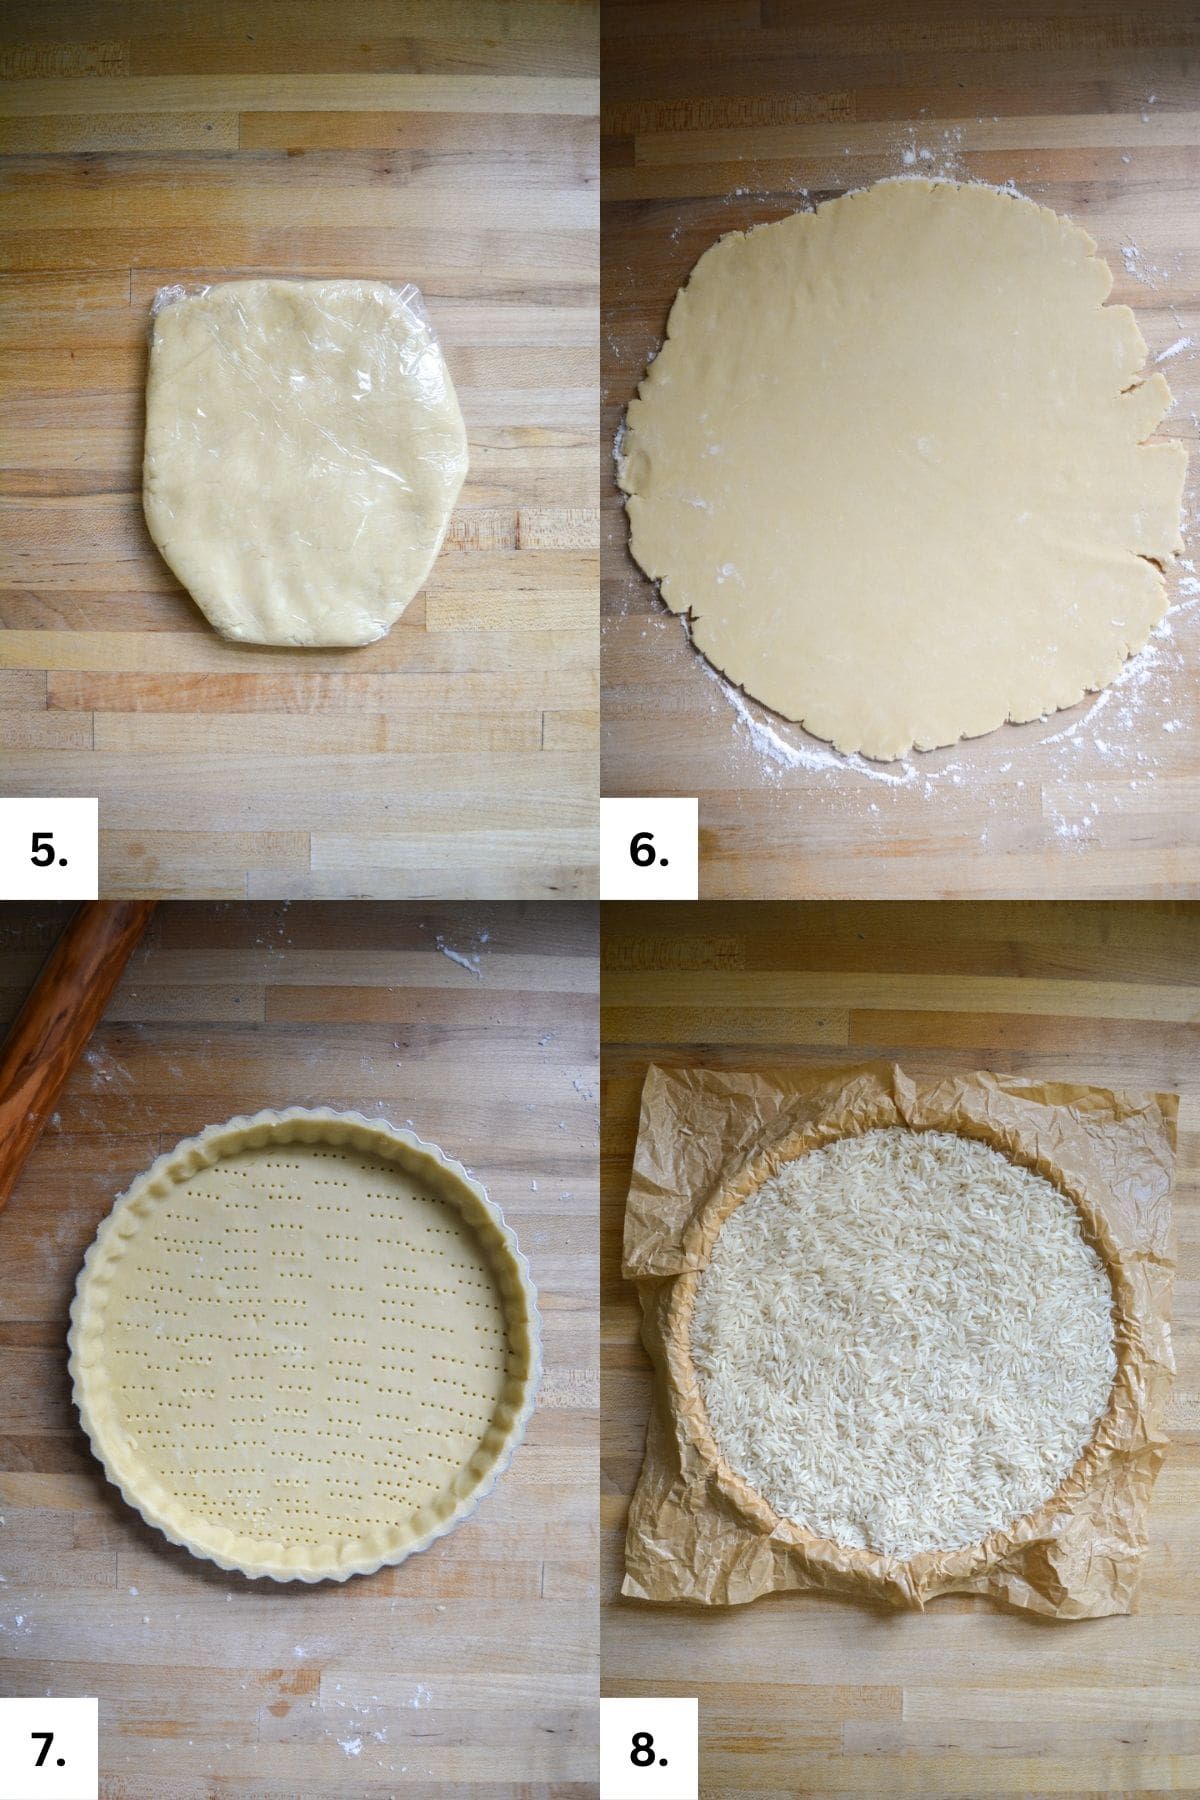 Step-by-step photos pf rolling the tart dough out and inserting it into the tart pan.